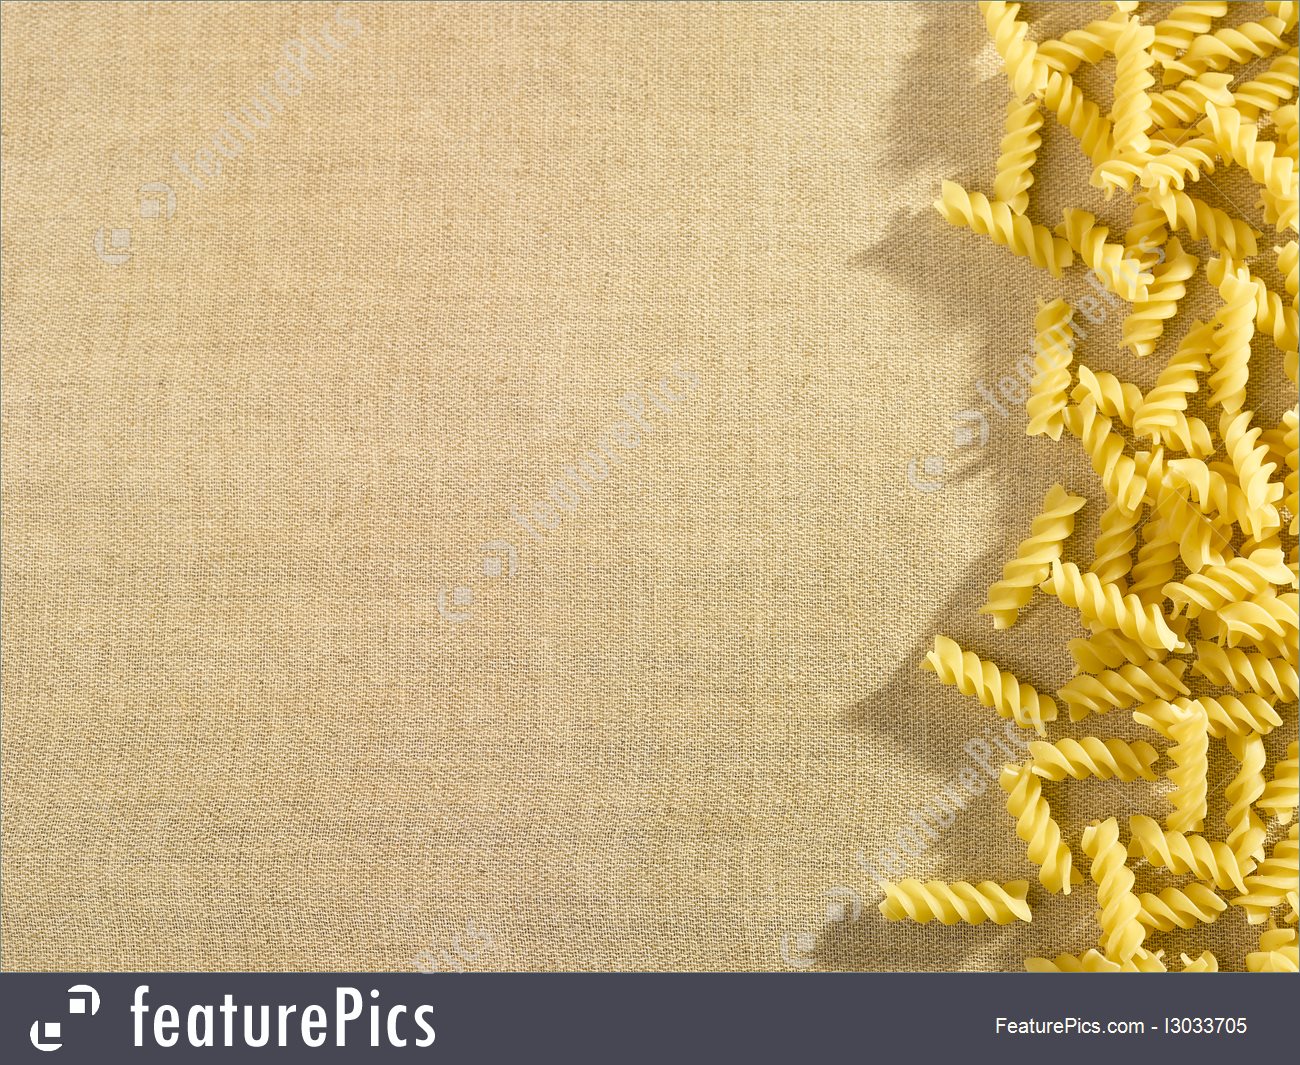 Food Ingredients Pasta On Background Stock Image I3033705 At